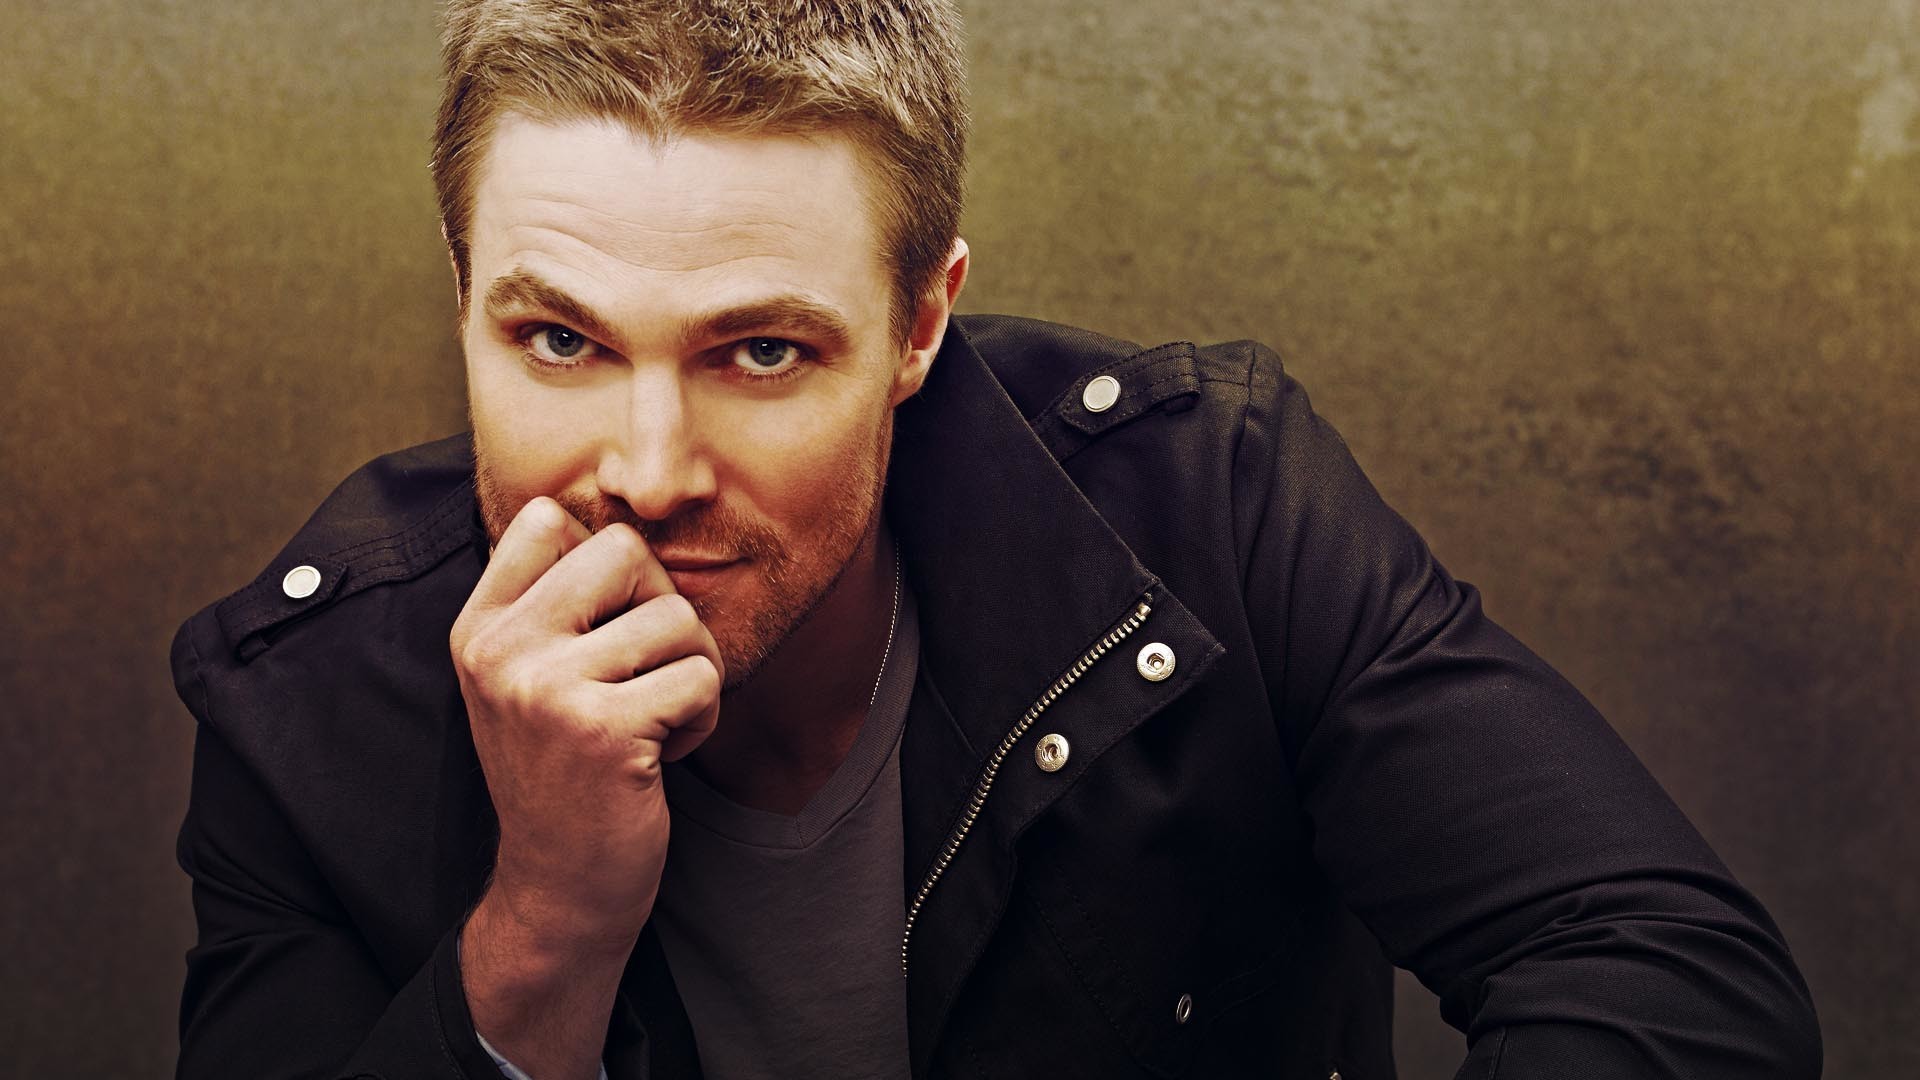 1920x1080  Wallpaper of Oliver Queen for fans of Arrow.